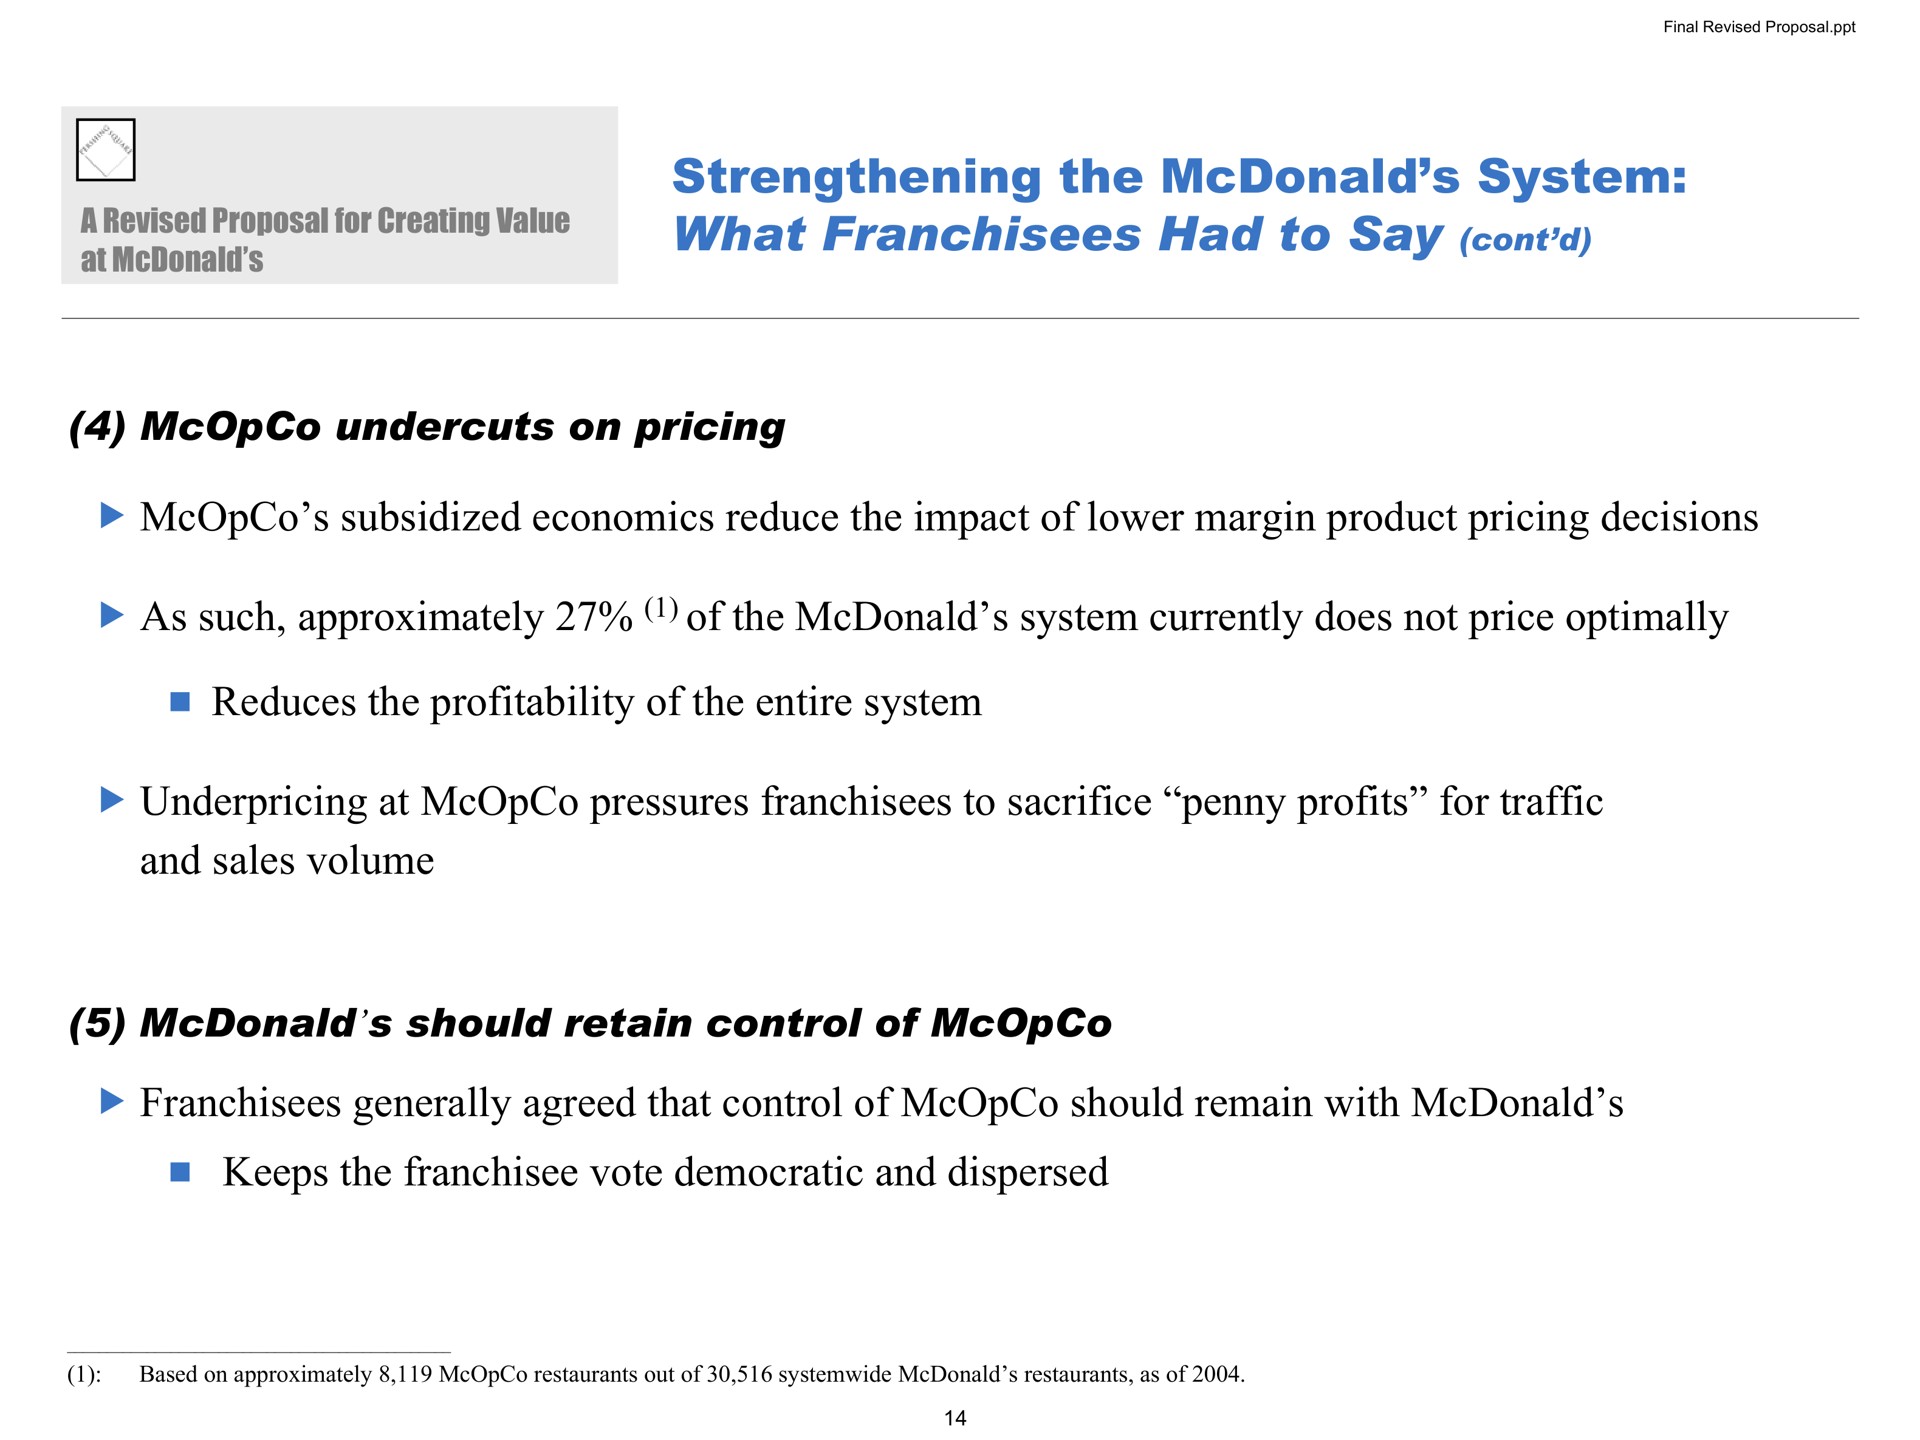 strengthening the system what franchisees had to say undercuts on pricing subsidized economics reduce the impact of lower margin product pricing decisions as such approximately of the system currently does not price reduces the profitability of the entire system underpricing at pressures franchisees to sacrifice penny profits for traffic and sales volume should retain control of franchisees generally agreed that control of should remain with keeps the vote democratic and dispersed proposal a revised creating | Pershing Square